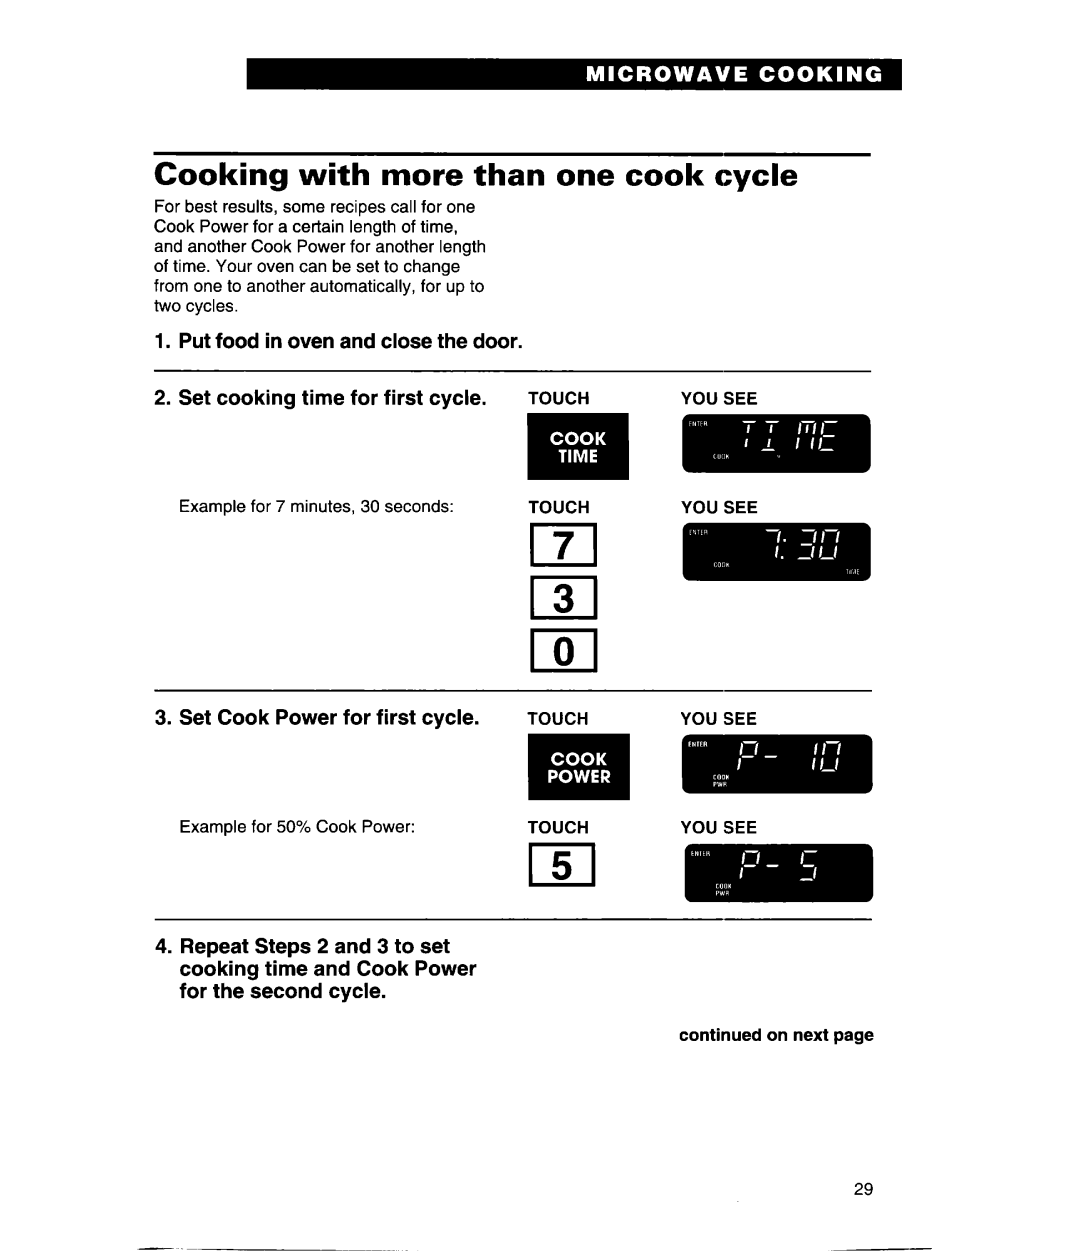 Whirlpool GH9115XE Cooking with more than one cook cycle, Set cooking time for first cycle, Set Cook Power for first cycle 